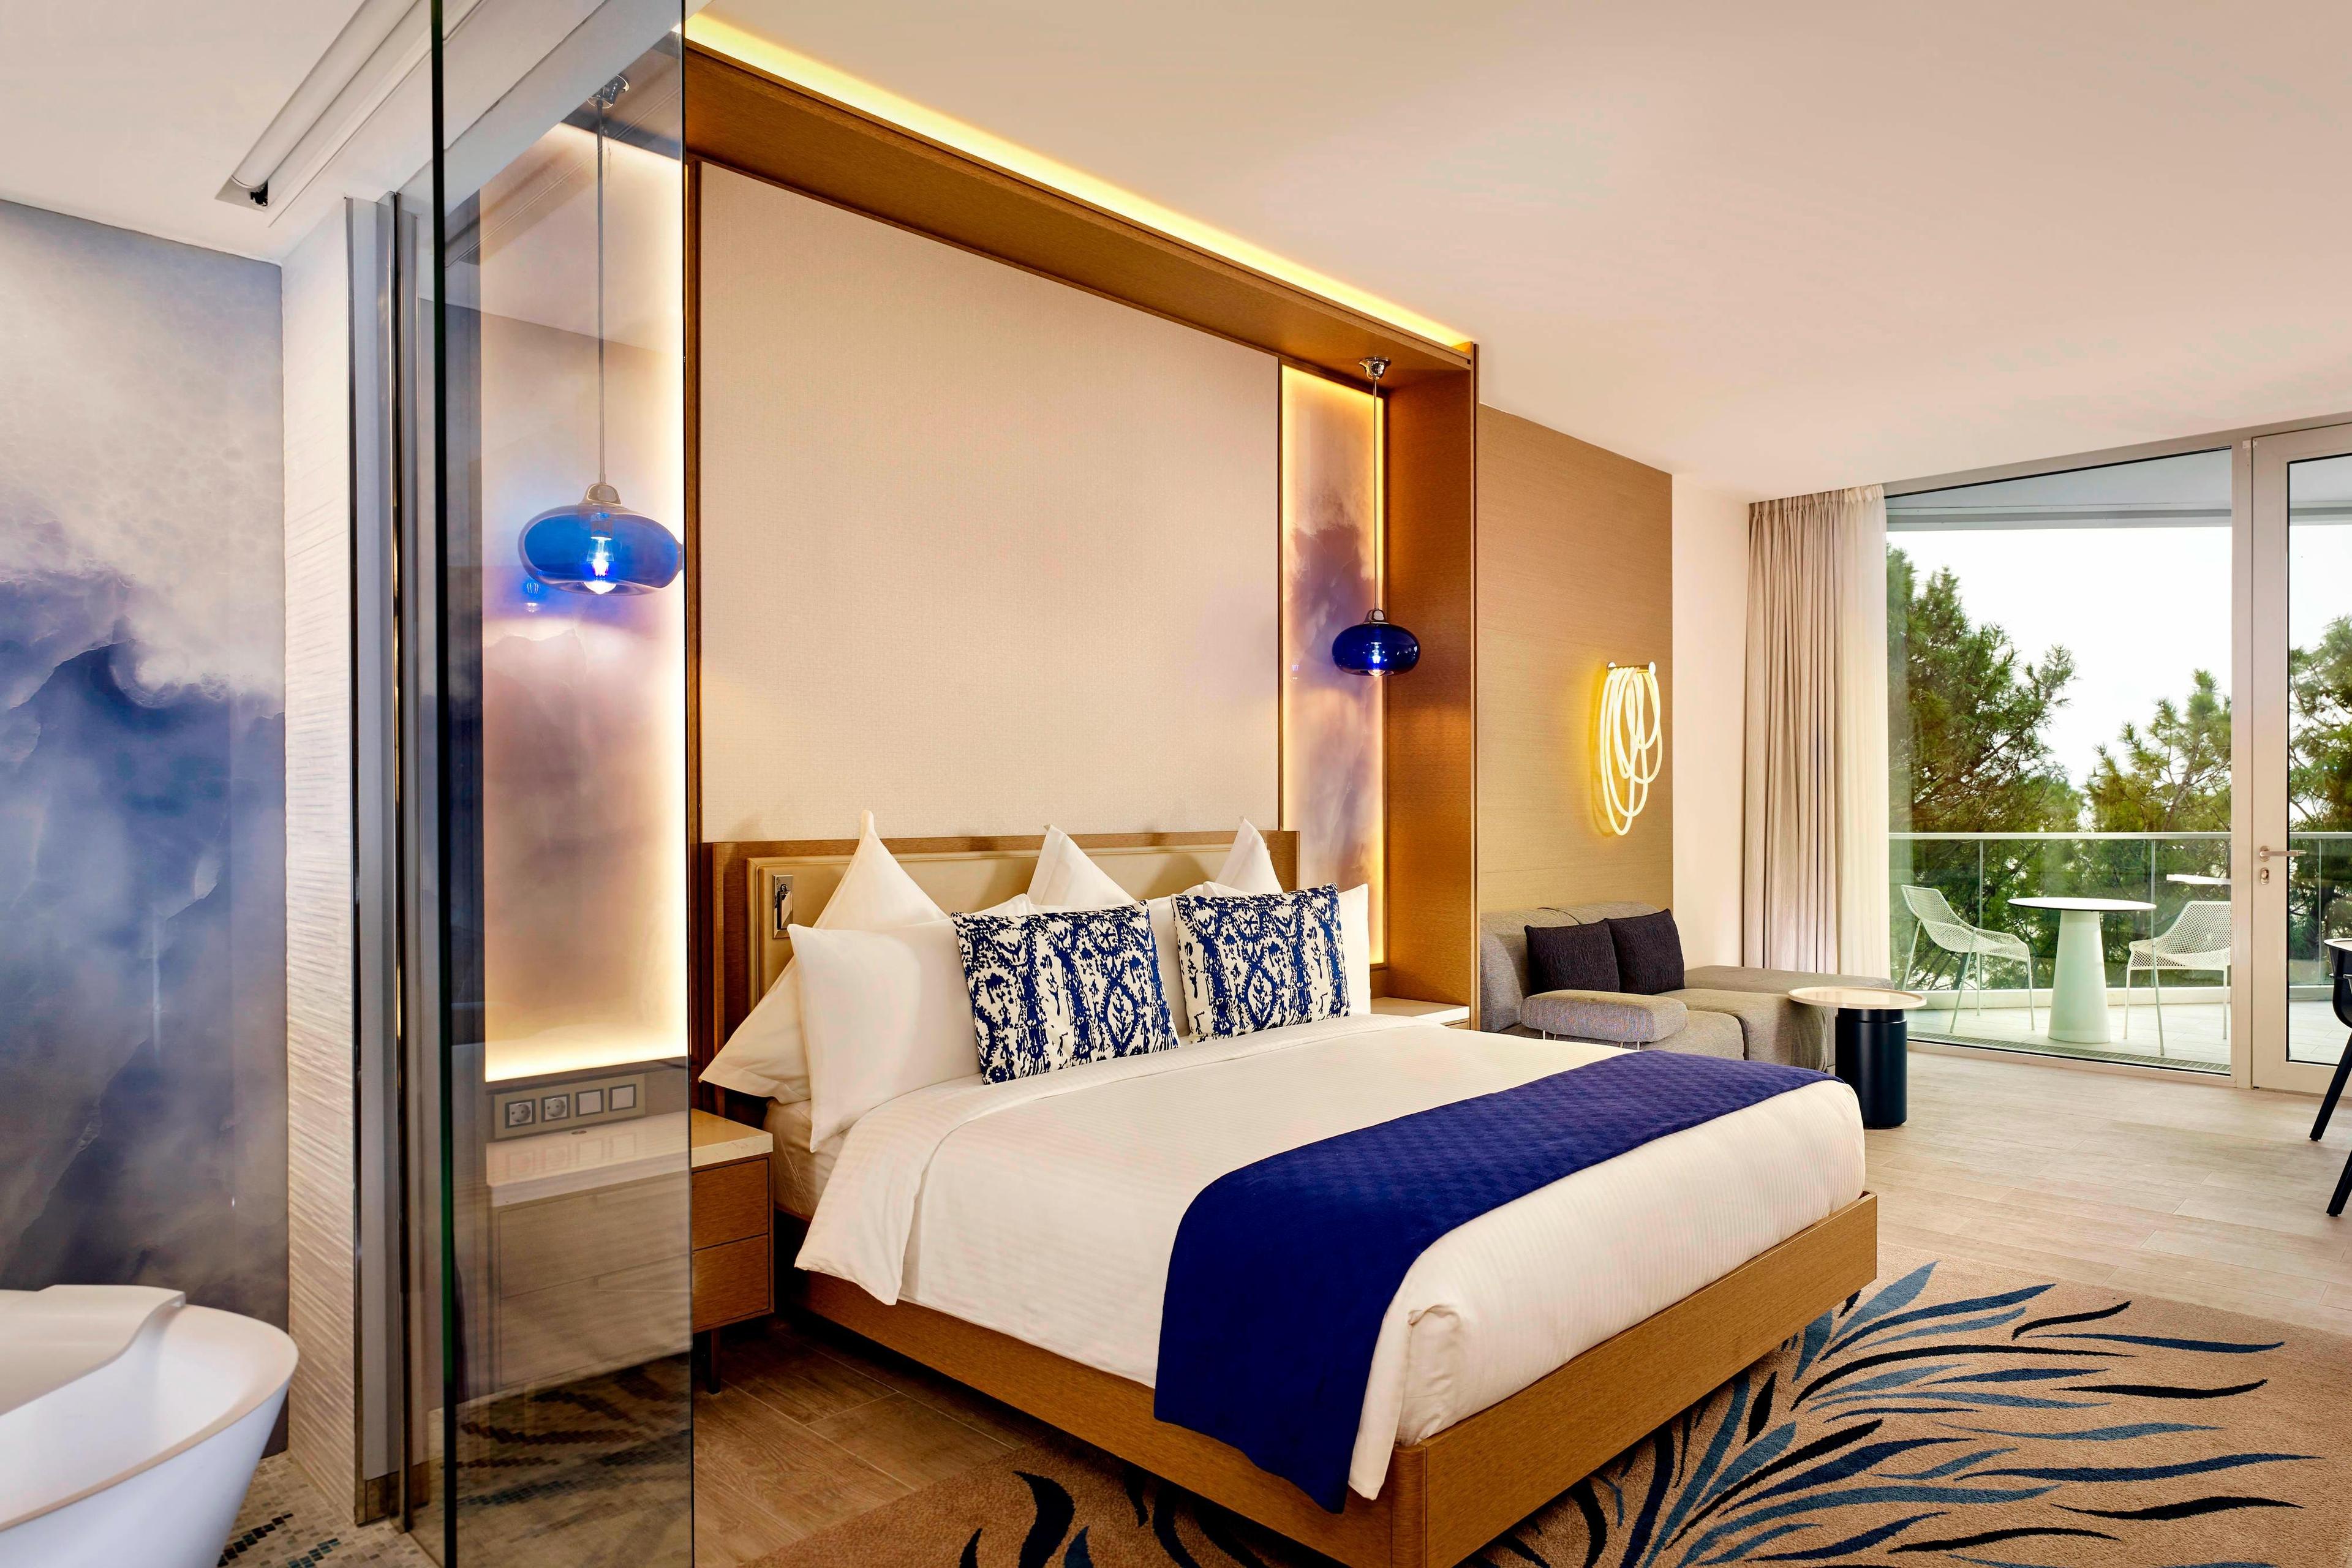 Our King guest room is where modern design meets absolute comfort. Bold, sea-inspired detailing invites you to relax and enjoy your stay, with panoramic views and a private balcony.